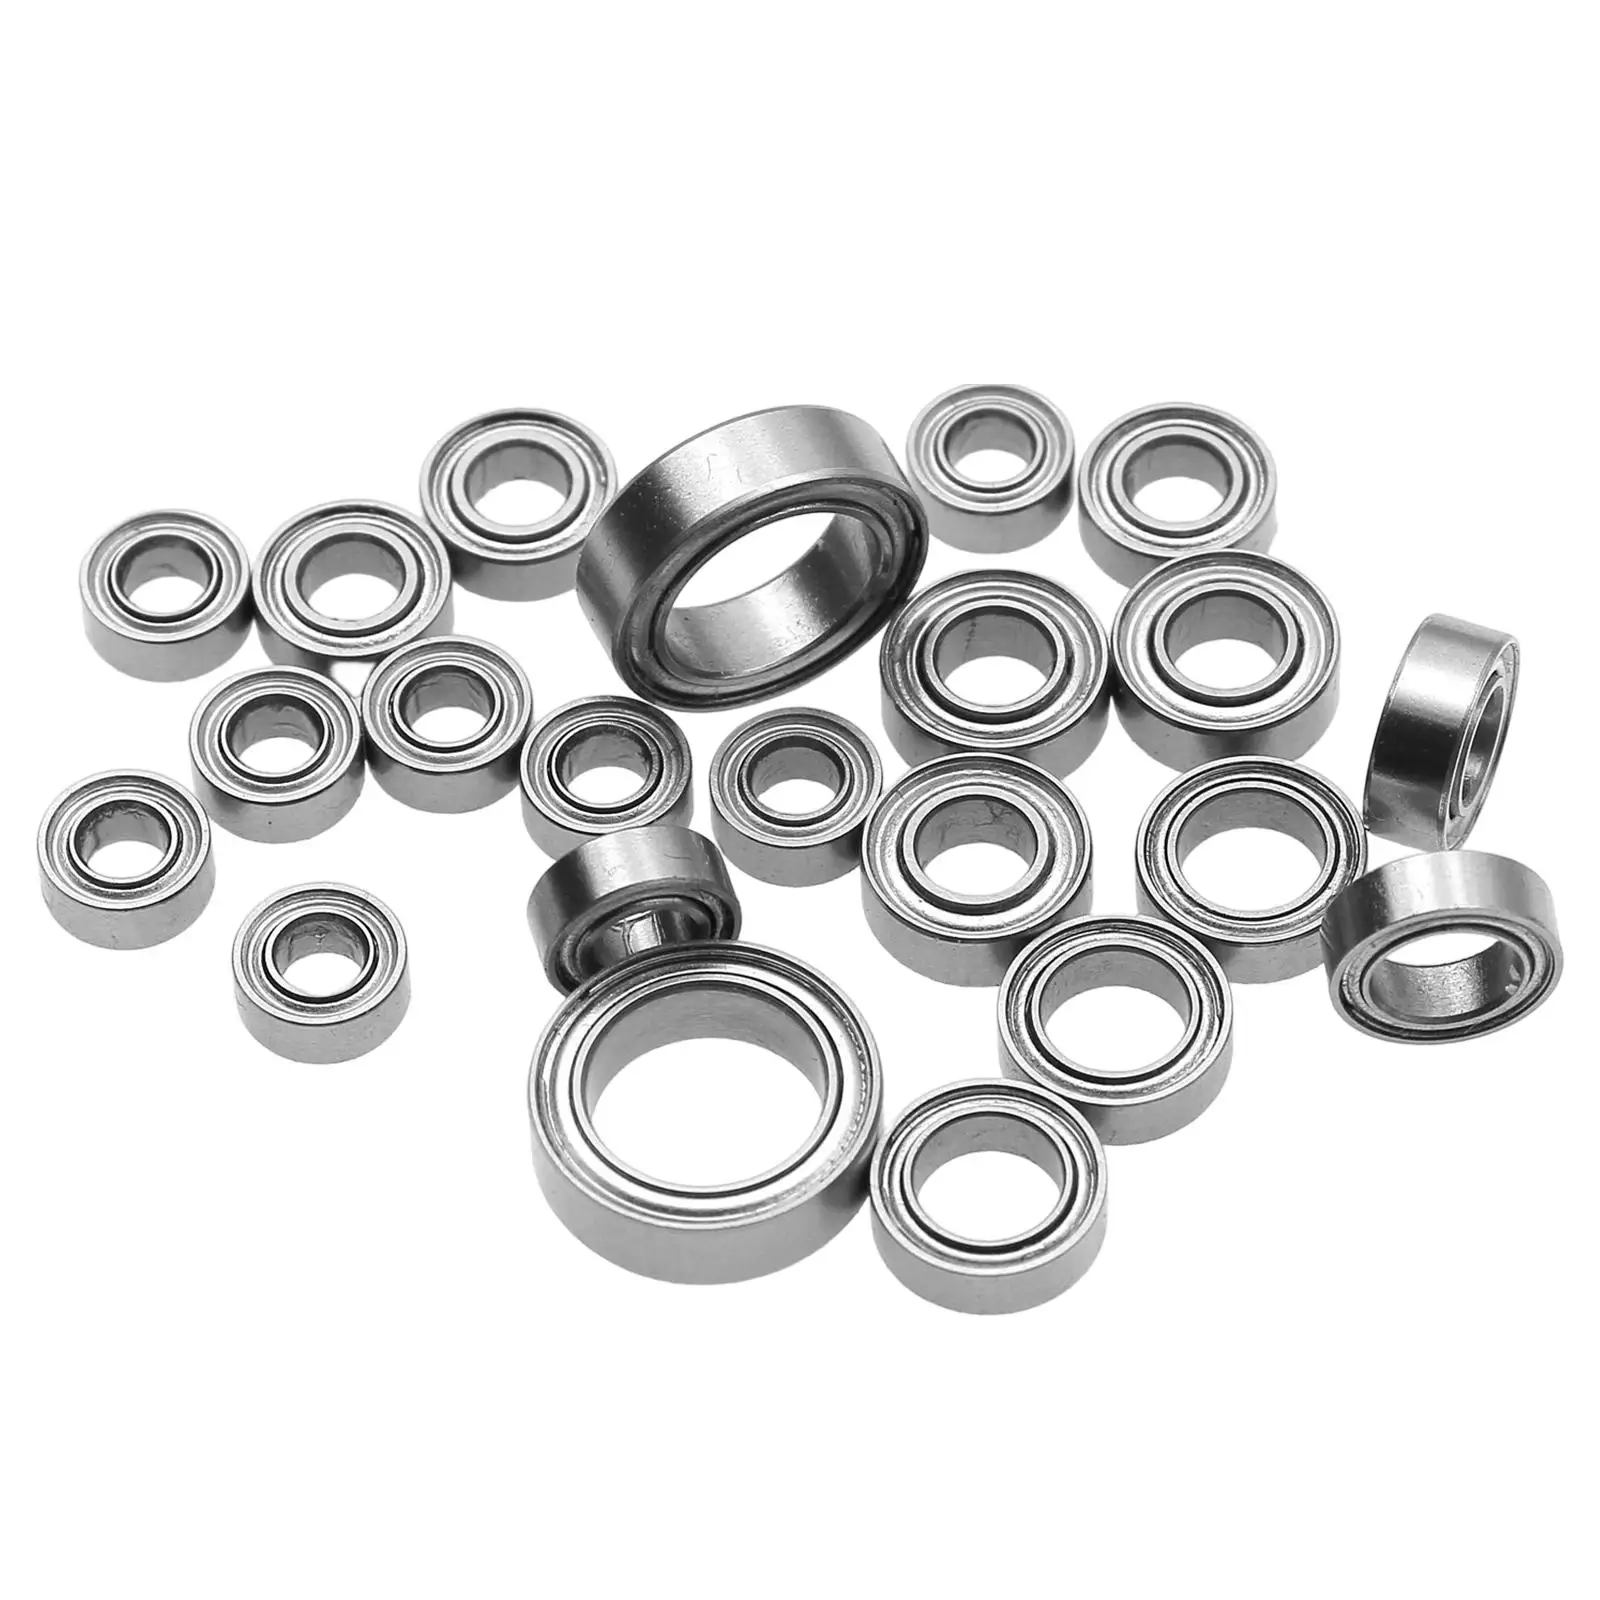 

22x RC Crawler RC Bearings Kit Replace Bearing and Seal Kit Practical Upgrade Parts Sturdy for 1/18 Model Car